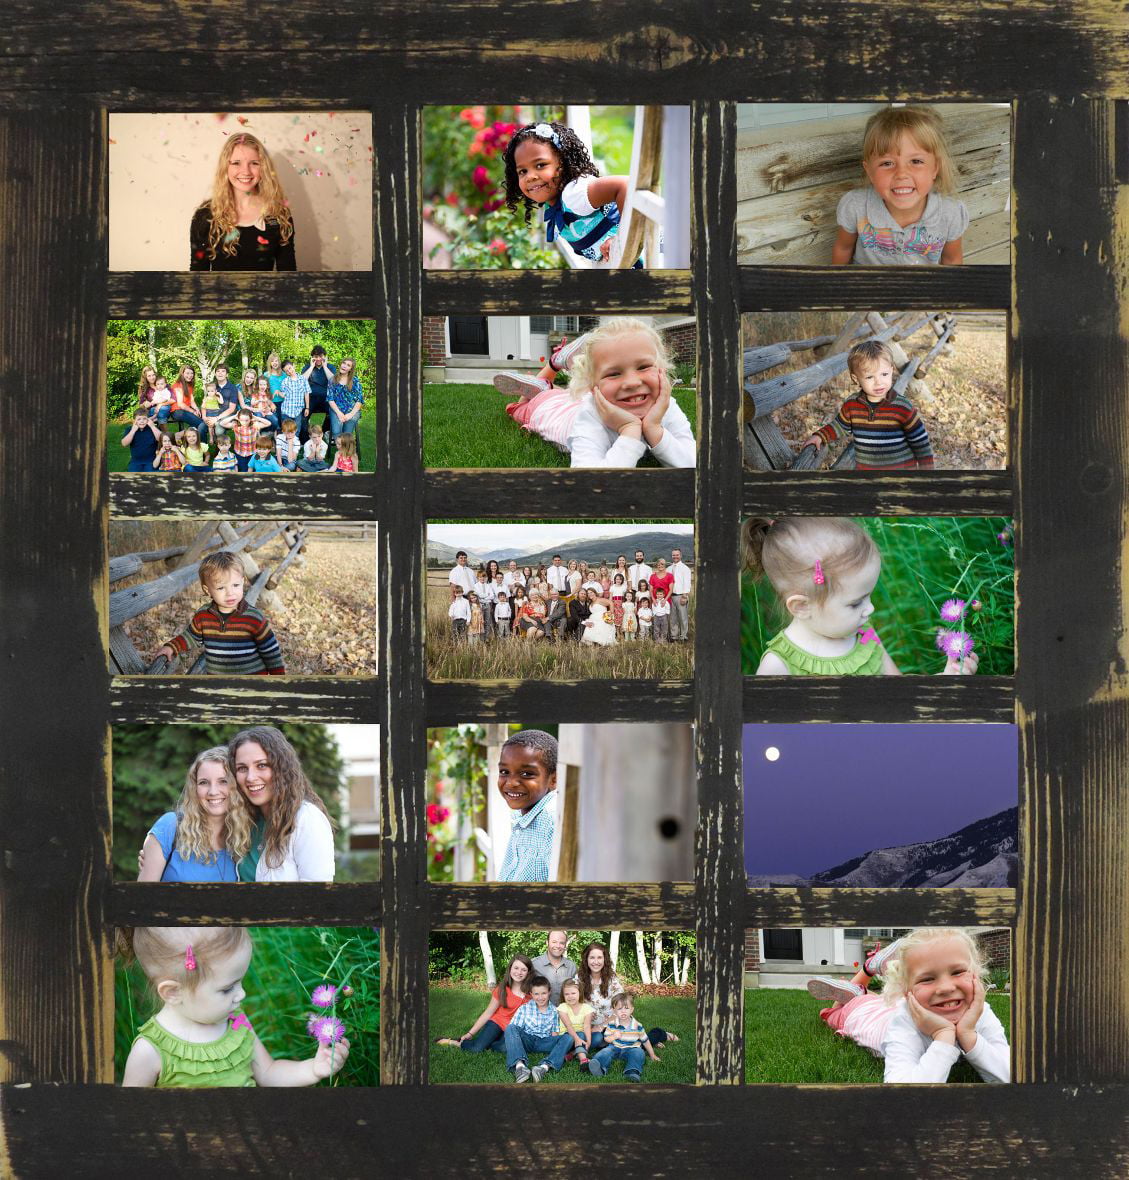 Prinz 6-Opening, for 4x6, 4x4, and 5x7 Photos Multi-Size Collage Picture  Frame, White-Gold